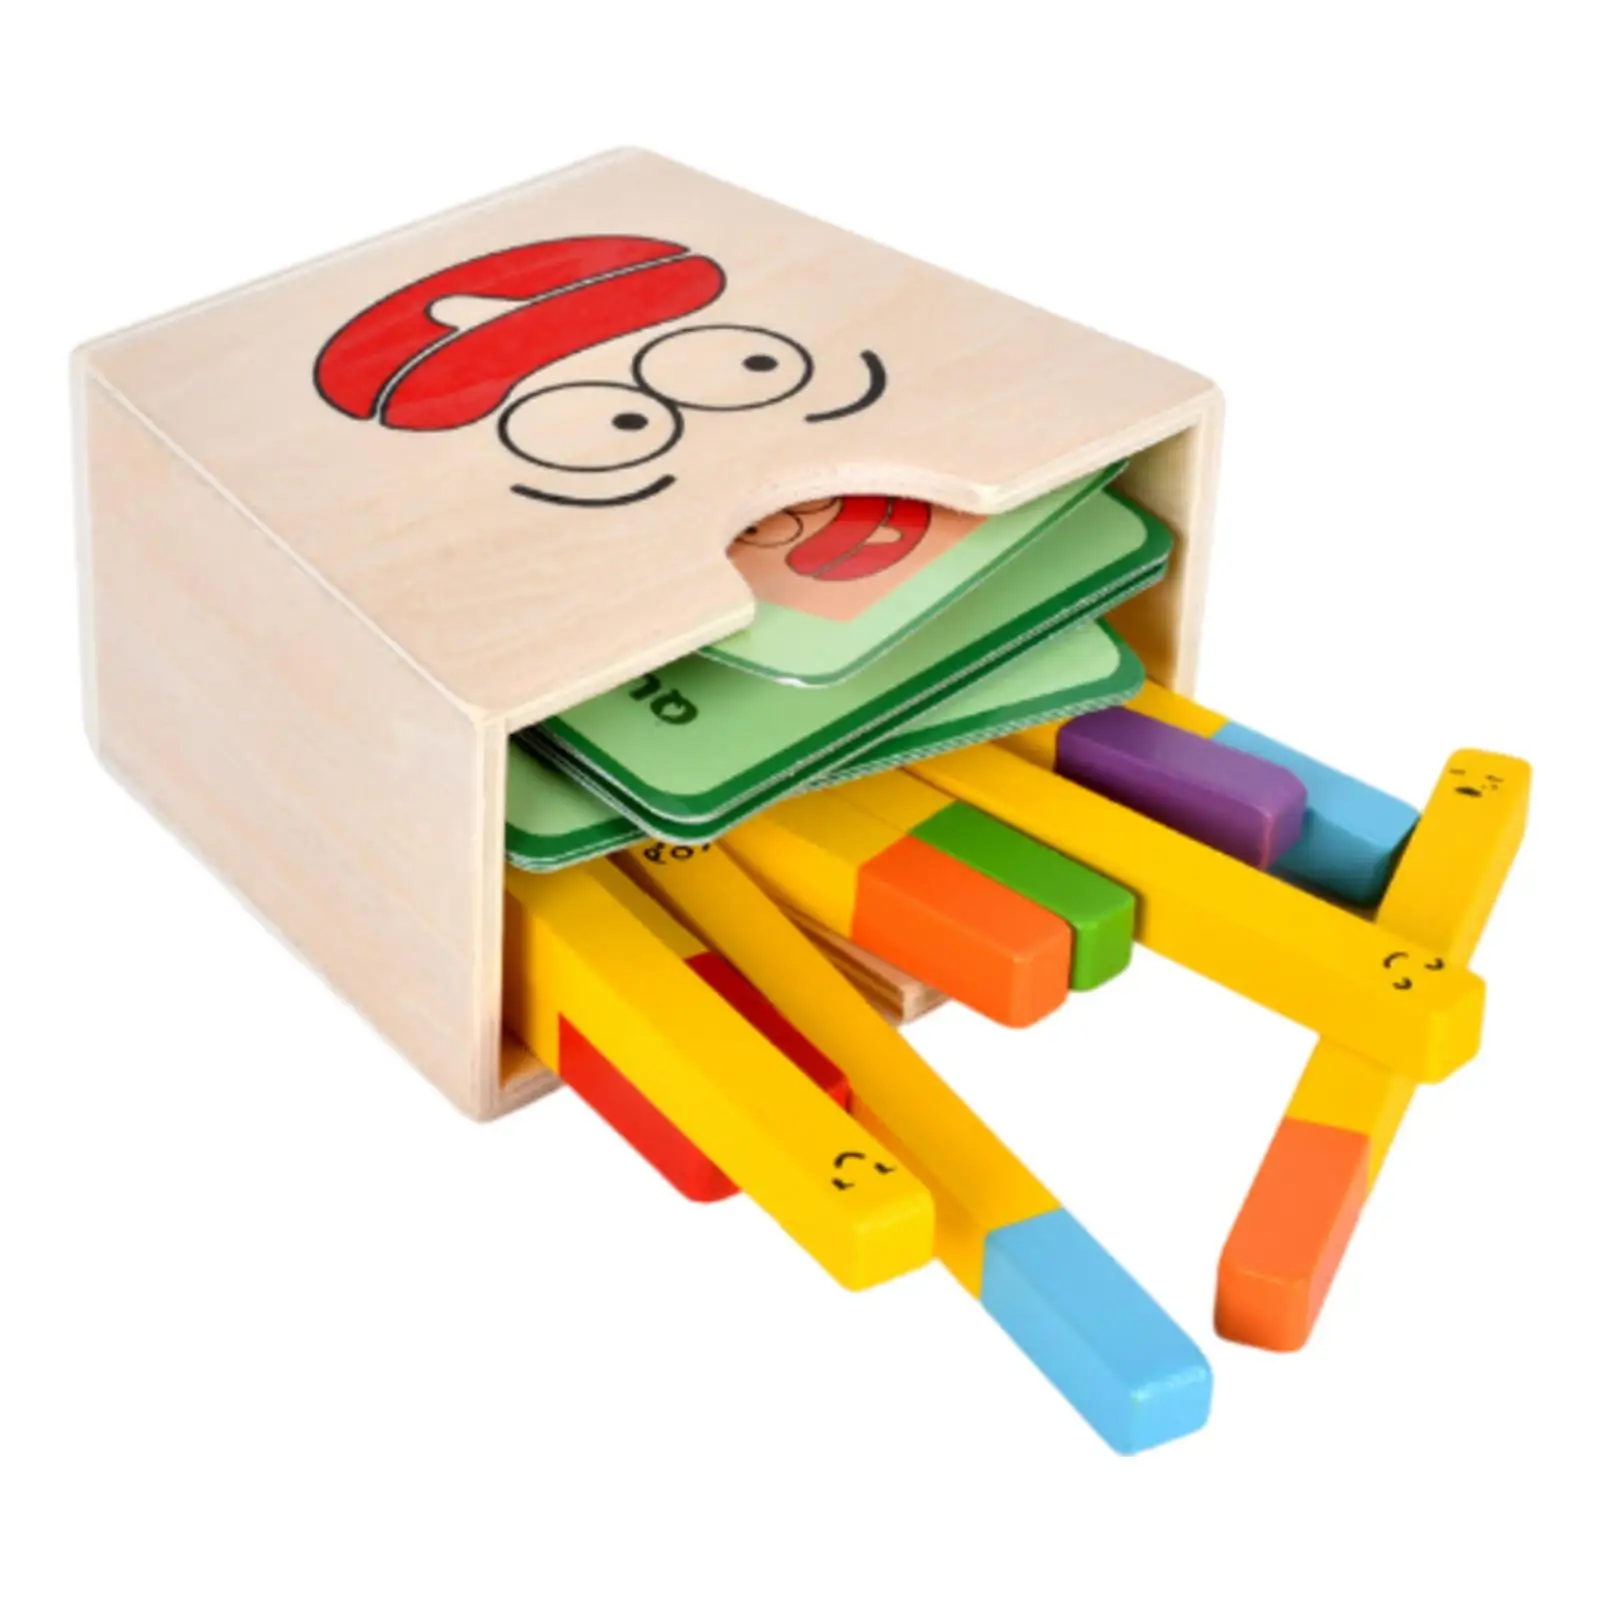 Wooden Color Sorting Game Interactive Sensory Montessori Color Sorting Matching Box for Counting Kindergarten Learning Preschool